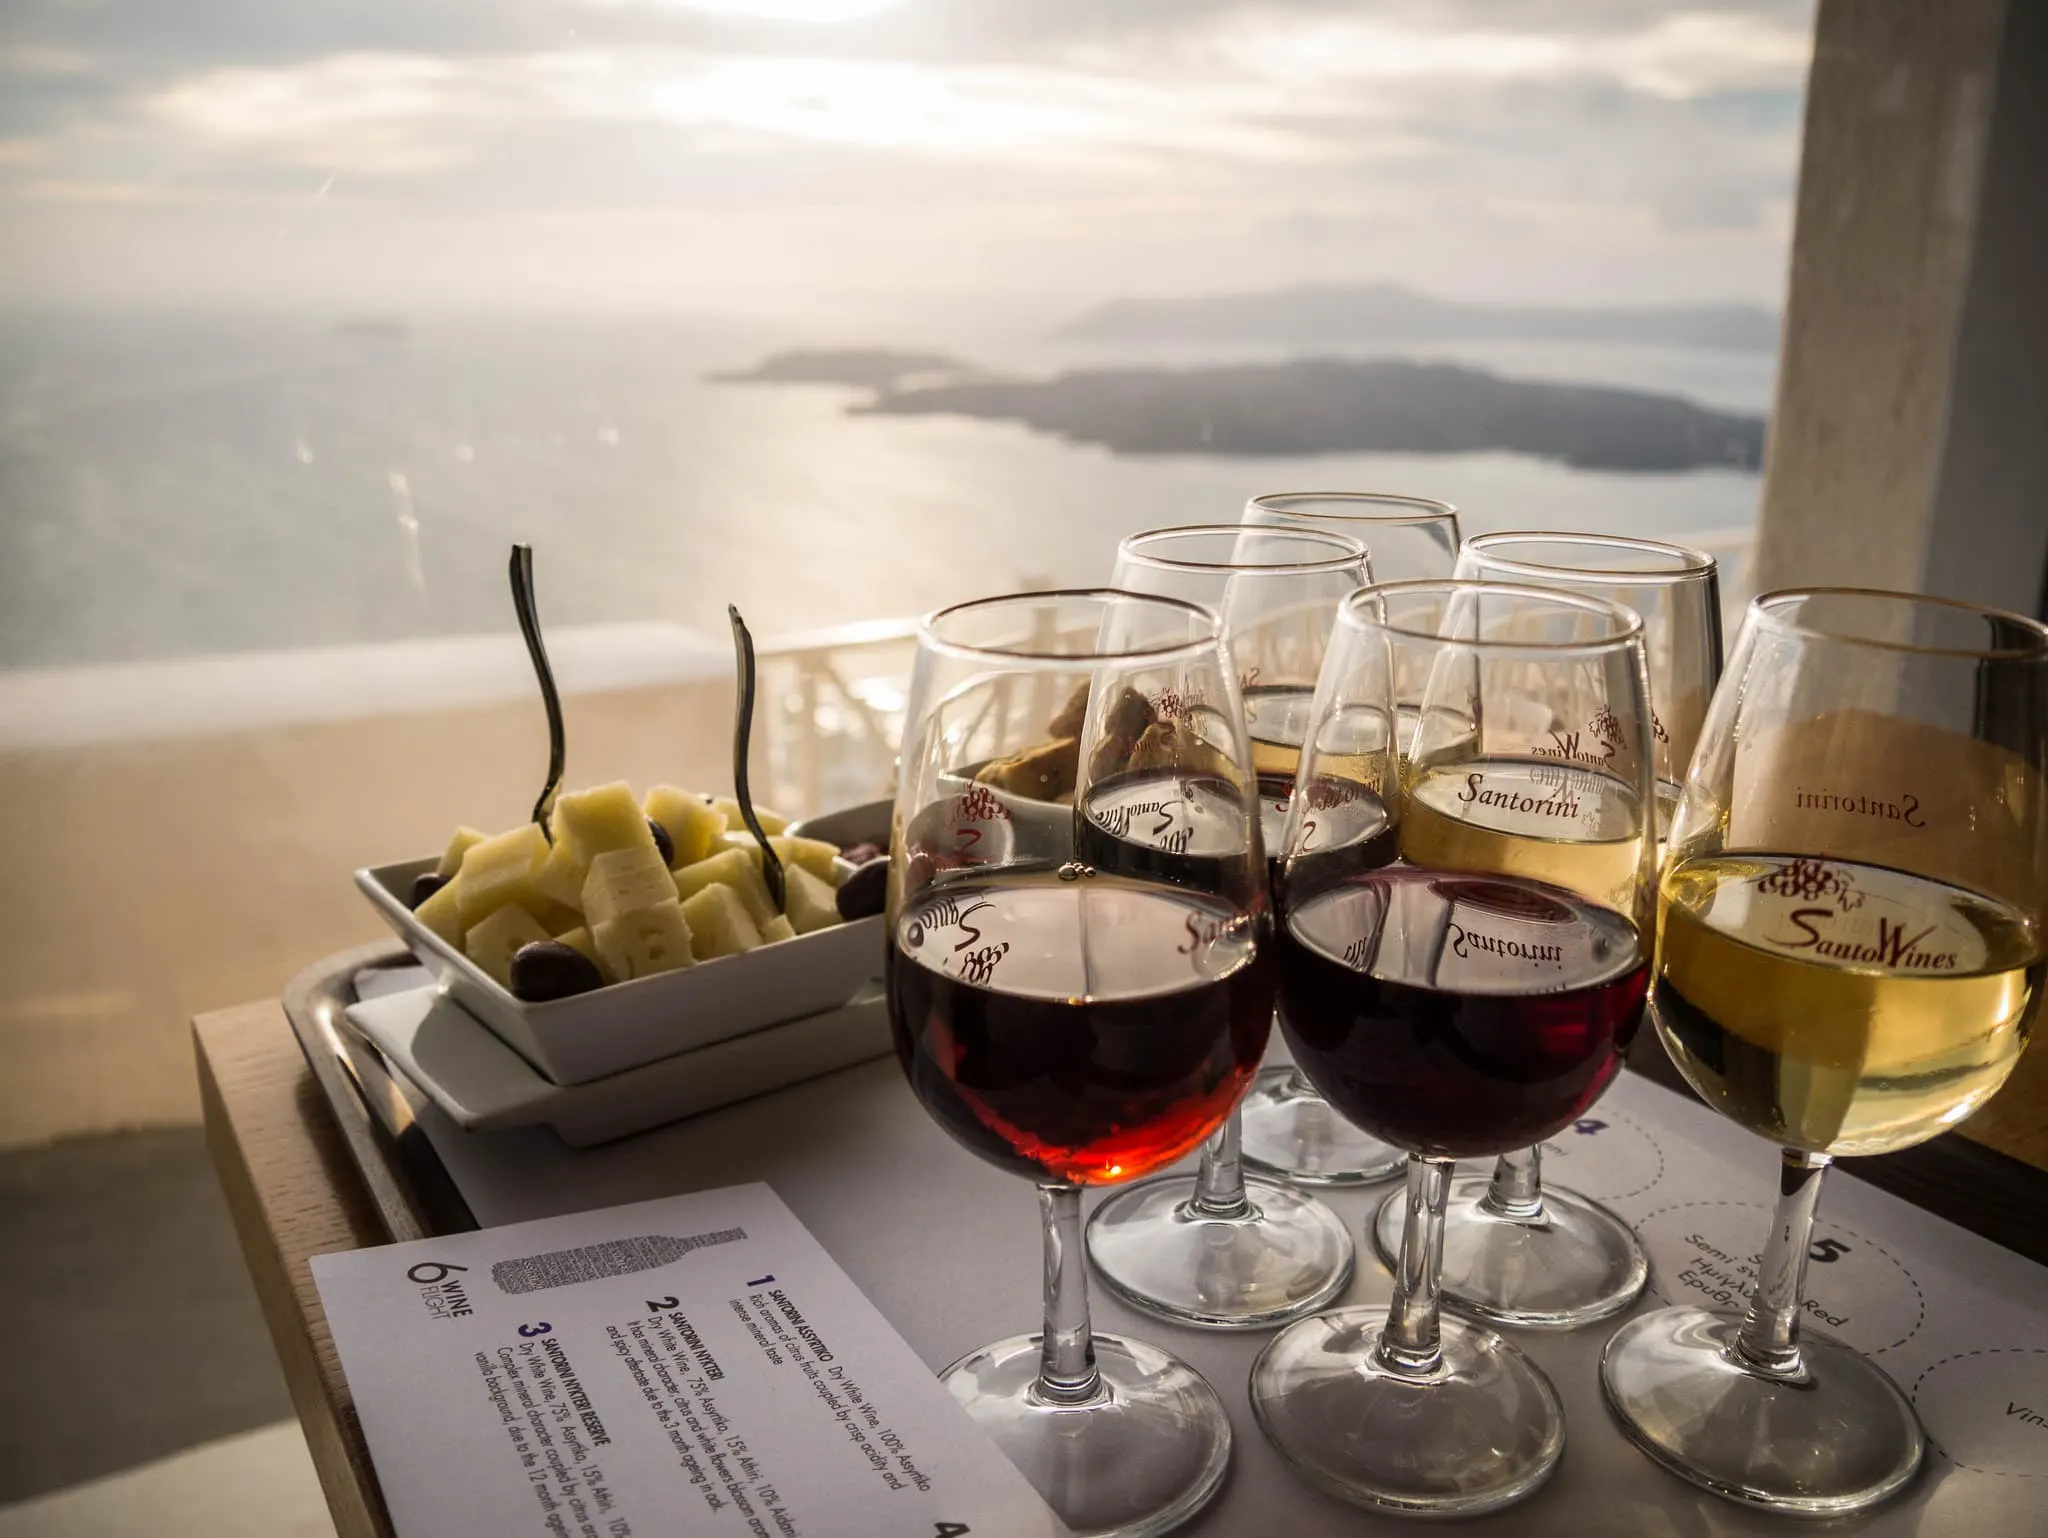 Things to do in Santorini, Places to visit in Santorini, Food to try in Santorini, Santorini wine tour, SantoWines